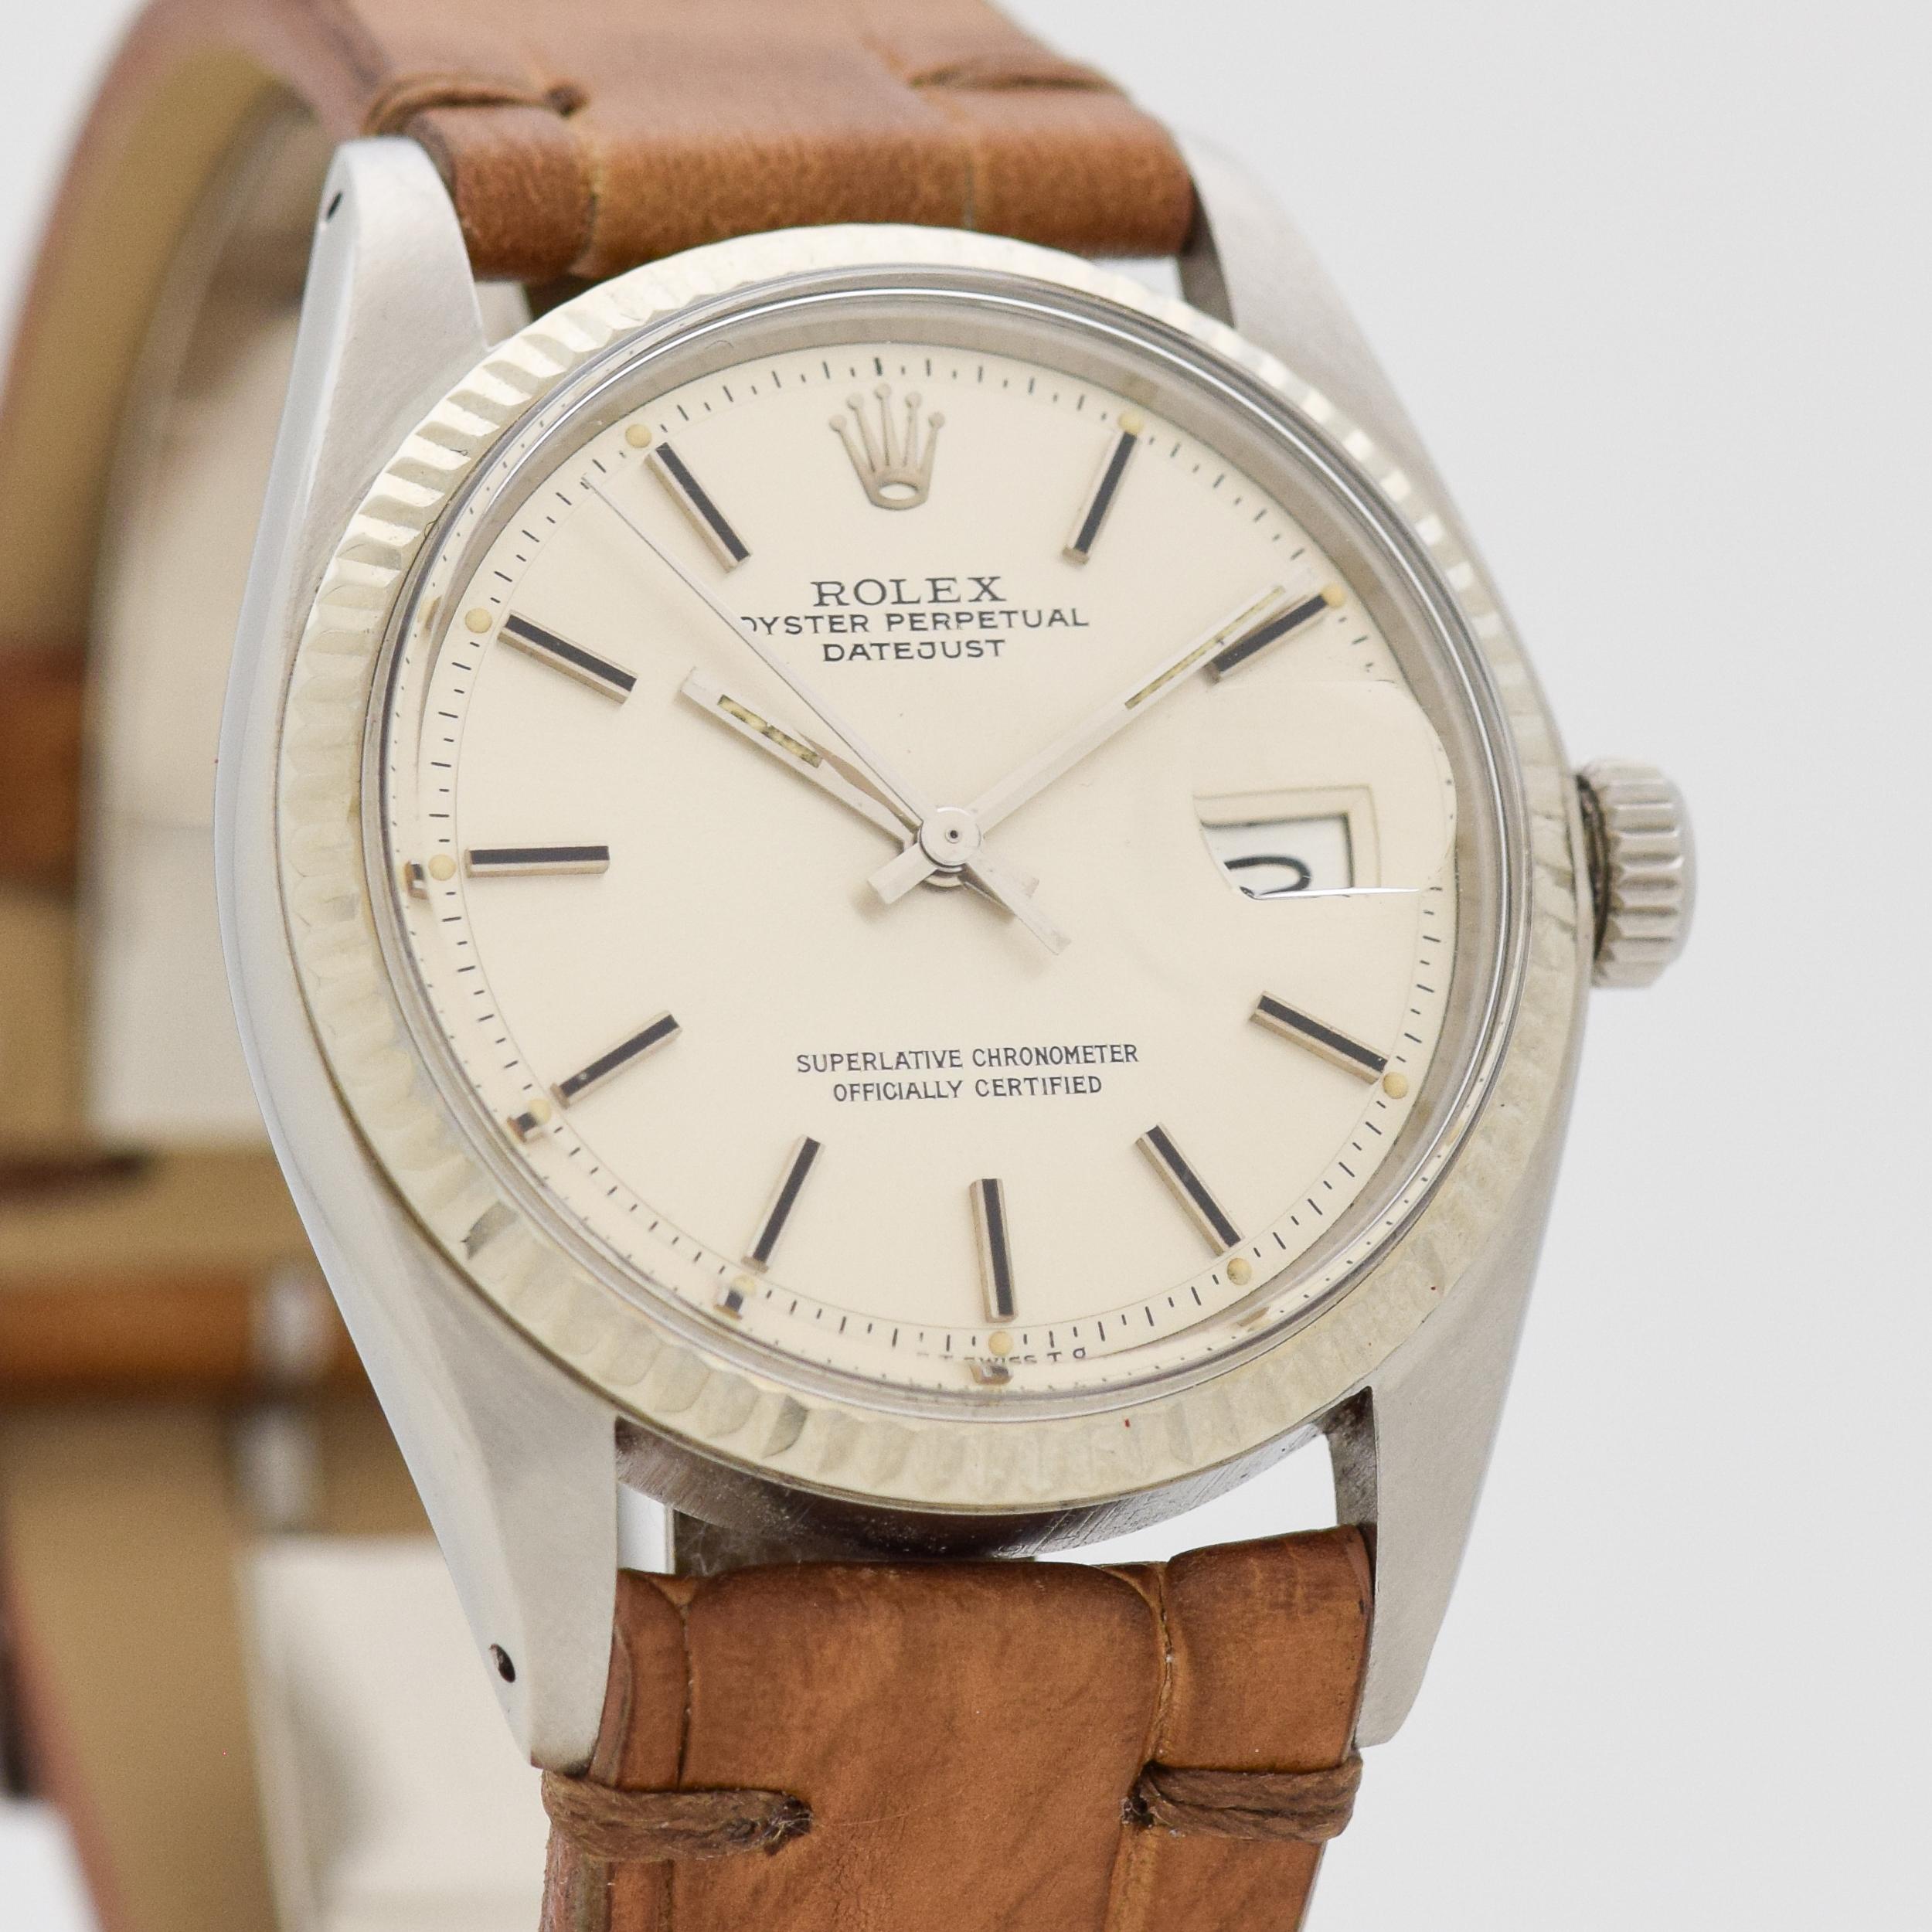 1977 Vintage Rolex Datejust Ref. 1601 14k White Gold Fluted Bezel with Stainless Steel Case watch with Original Silver Dial with Applied White Gold Stick/Bar/Baton Markers. 36mm x 43mm lug to lug (1.42 in. x 1.69 in.) - 26 jewel, automatic caliber